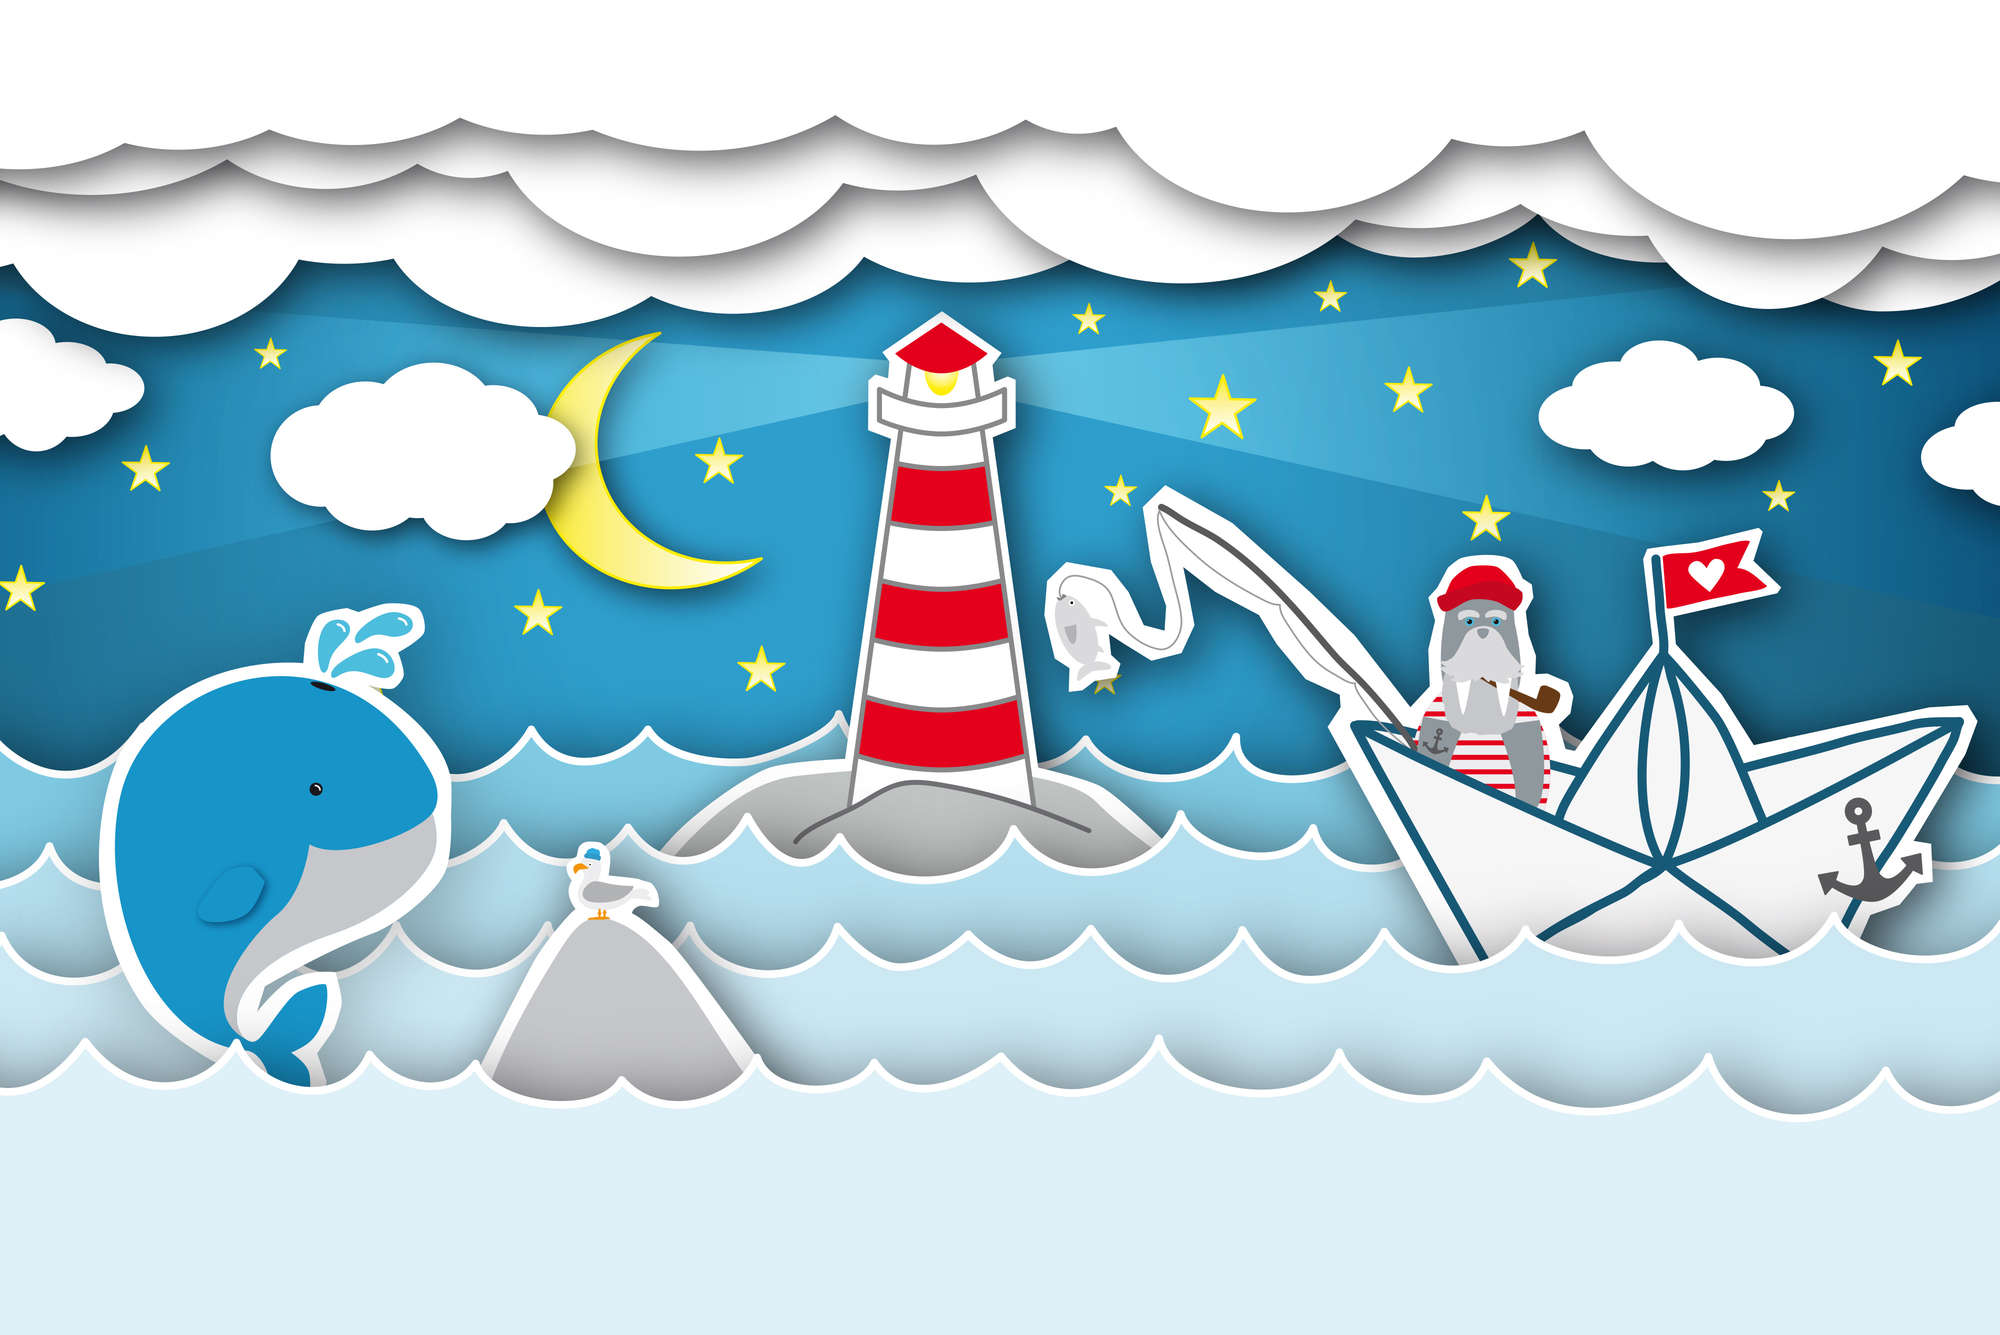             Children mural sea at night with lighthouse and sea bear on matt smooth non-woven
        